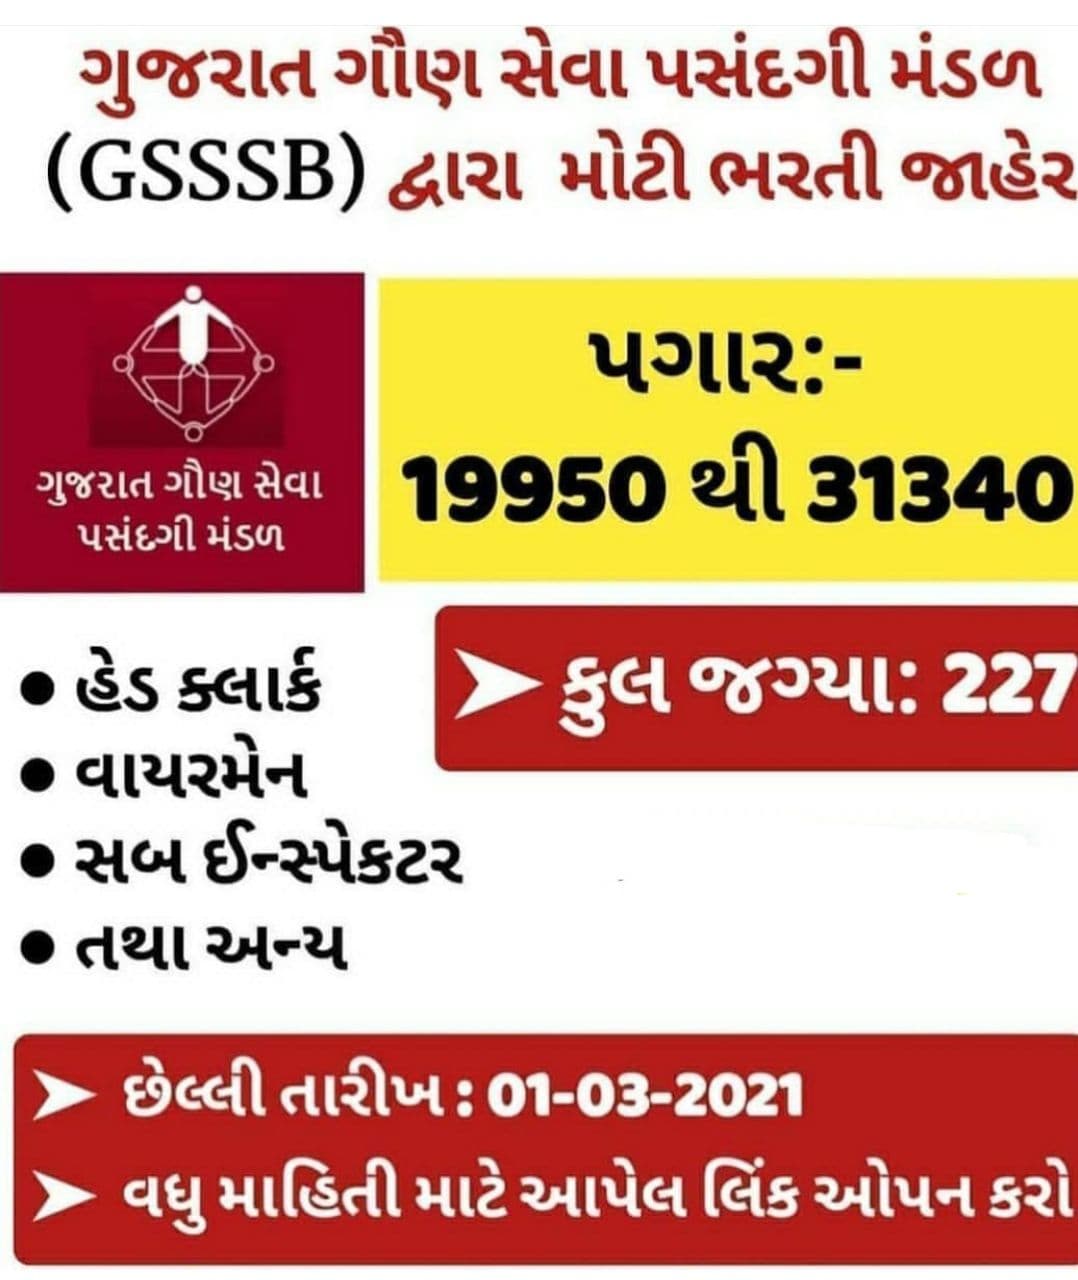 GSSSB Recruitment for 673 Head Clerk, Deputy Inspector, Sub Accountant/ Sub Auditor & Other Posts 2021 